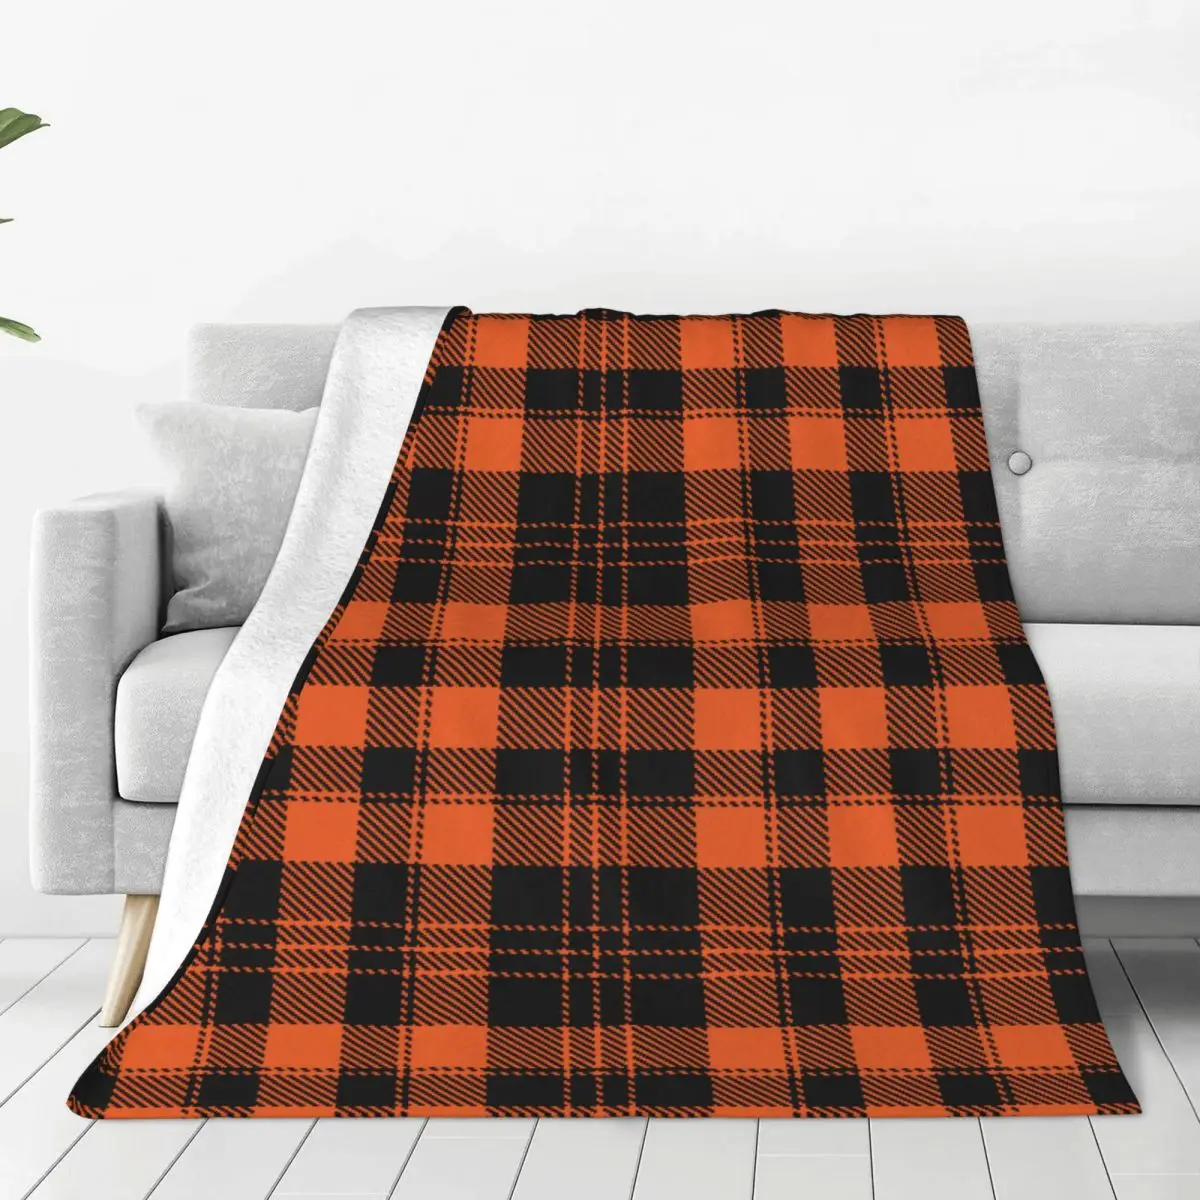 

Retro Tartan Cloth Knitted Blanket Fleece Halloween Pliad Super Soft Throw Blankets for Bedding Couch Bedroom Quilt